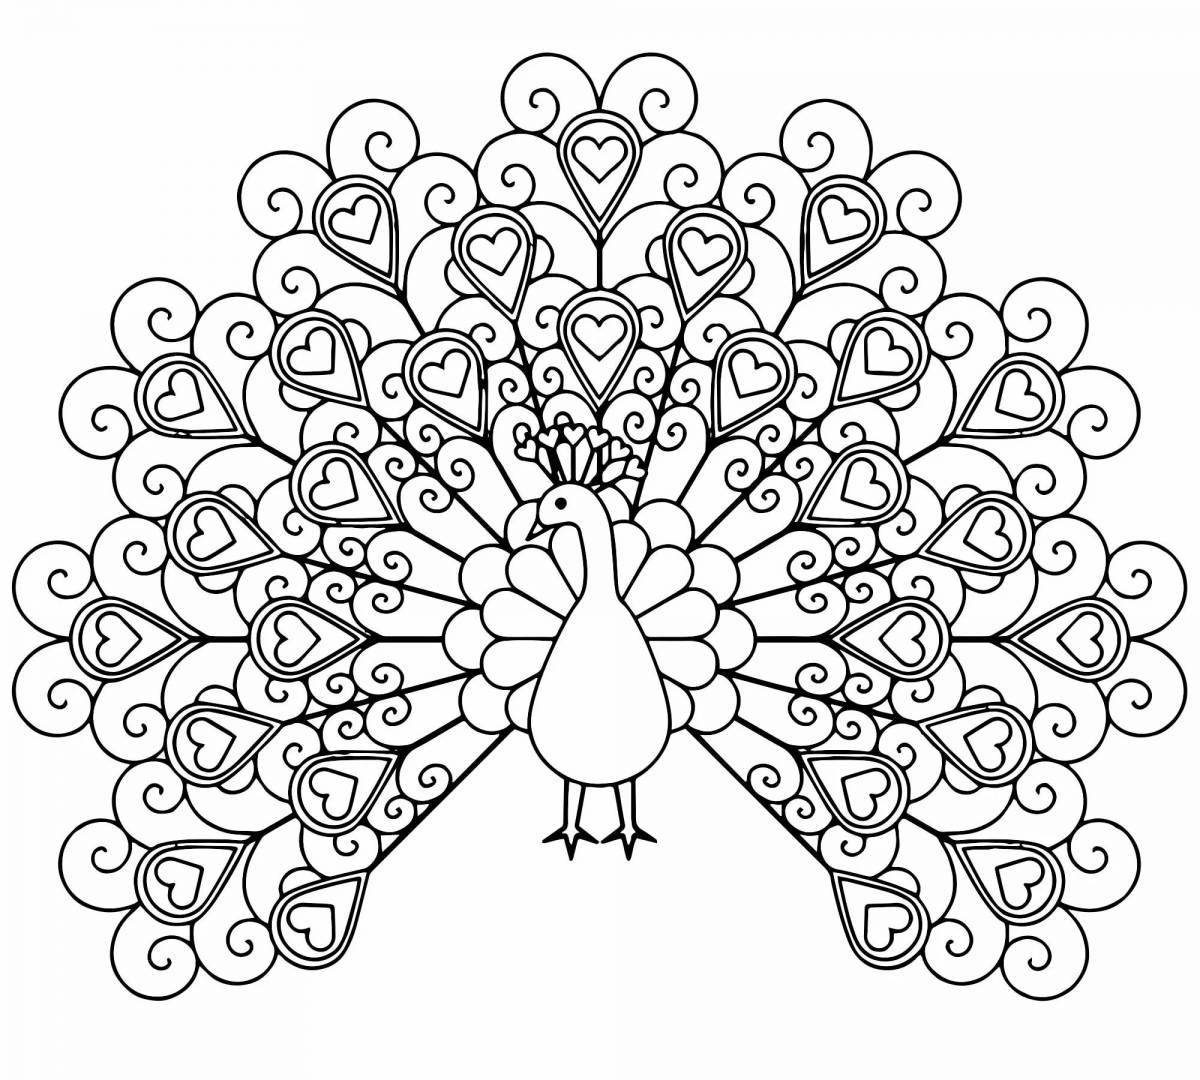 Adorable firebird coloring book for children 5-6 years old